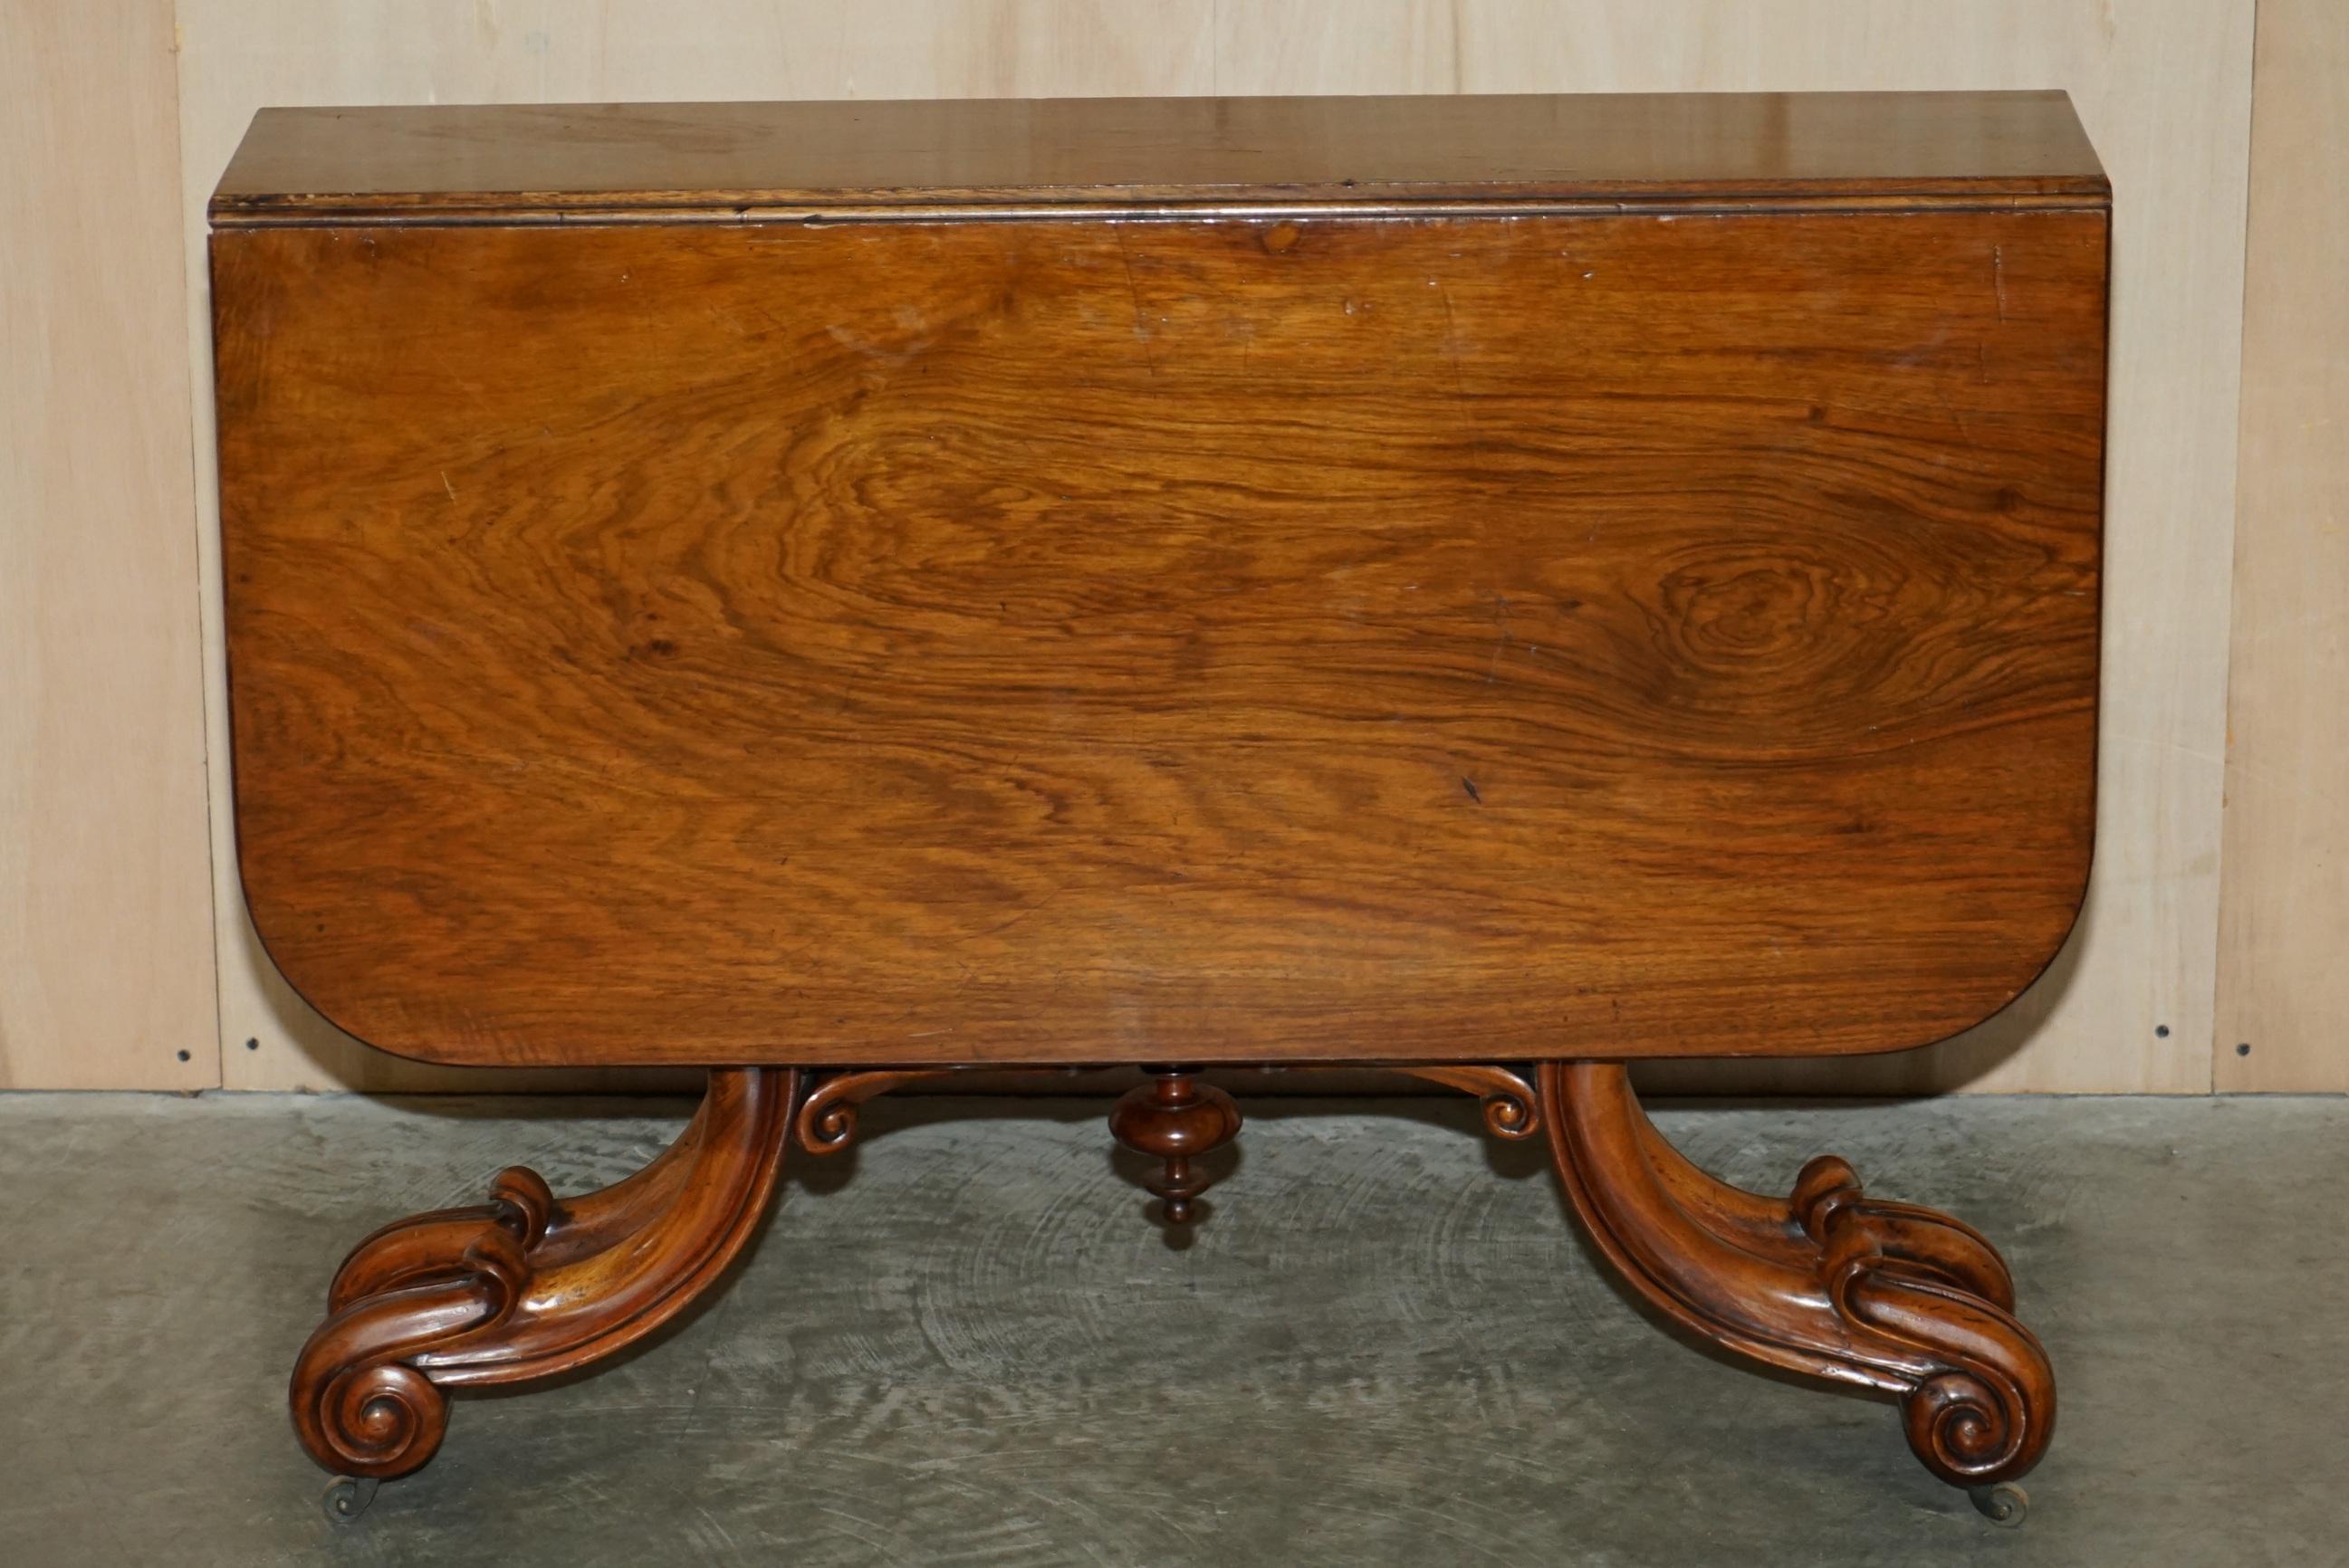 We are delighted to offer this wonderful Victorian walnut Sutherland folding side table with exquisitely carved ornate base

A very good looking and well made table, these are the best kind of antiques because they are functional in every day